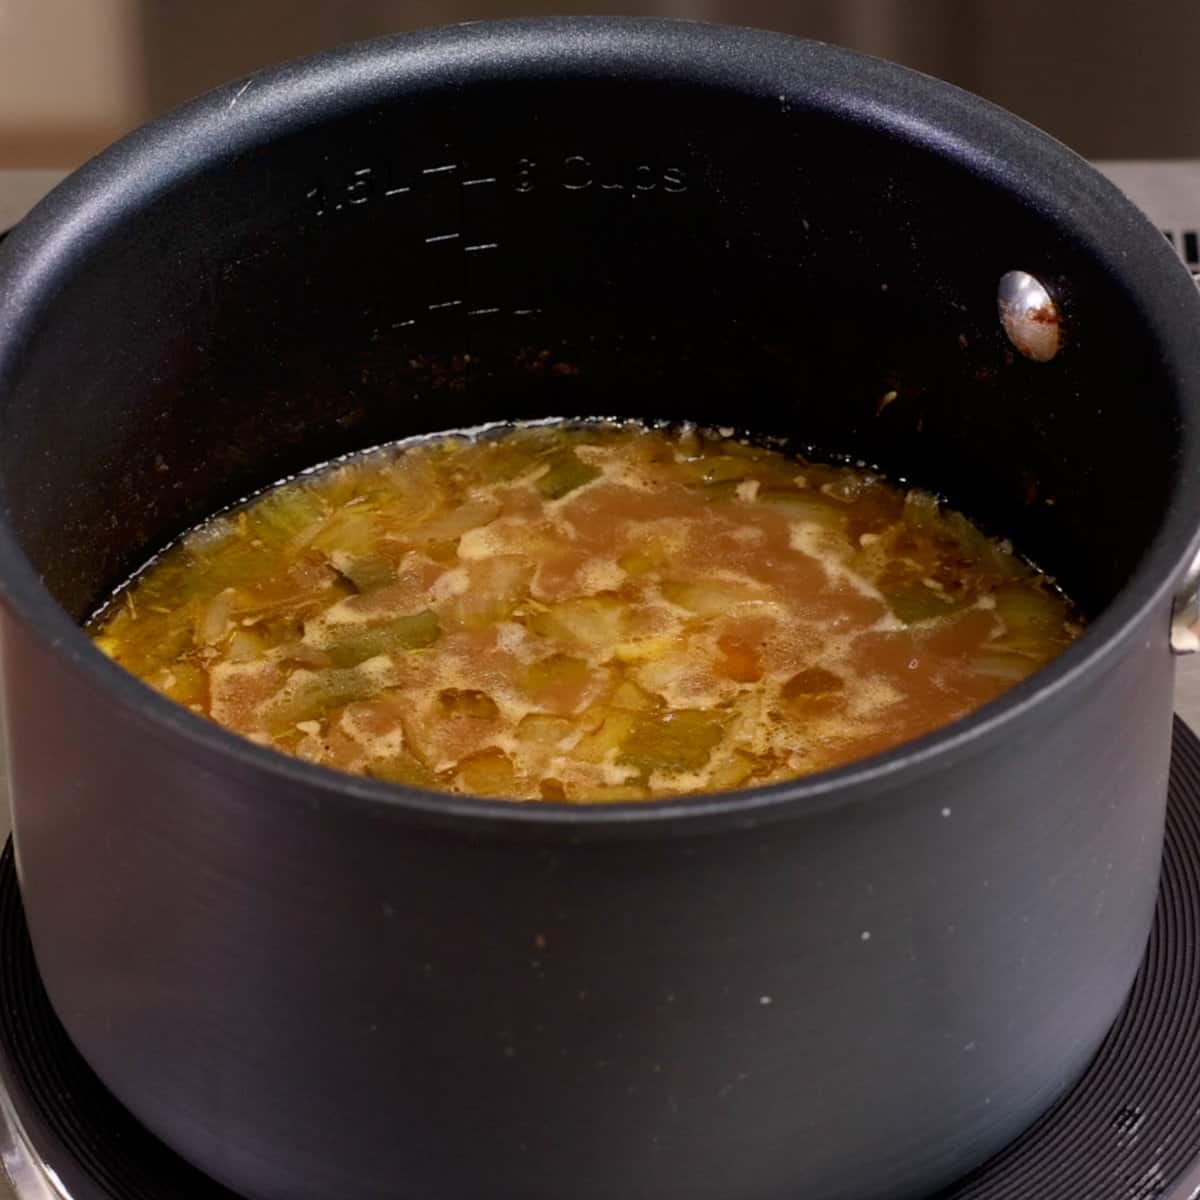 a pot of gumbo simmering on the stove